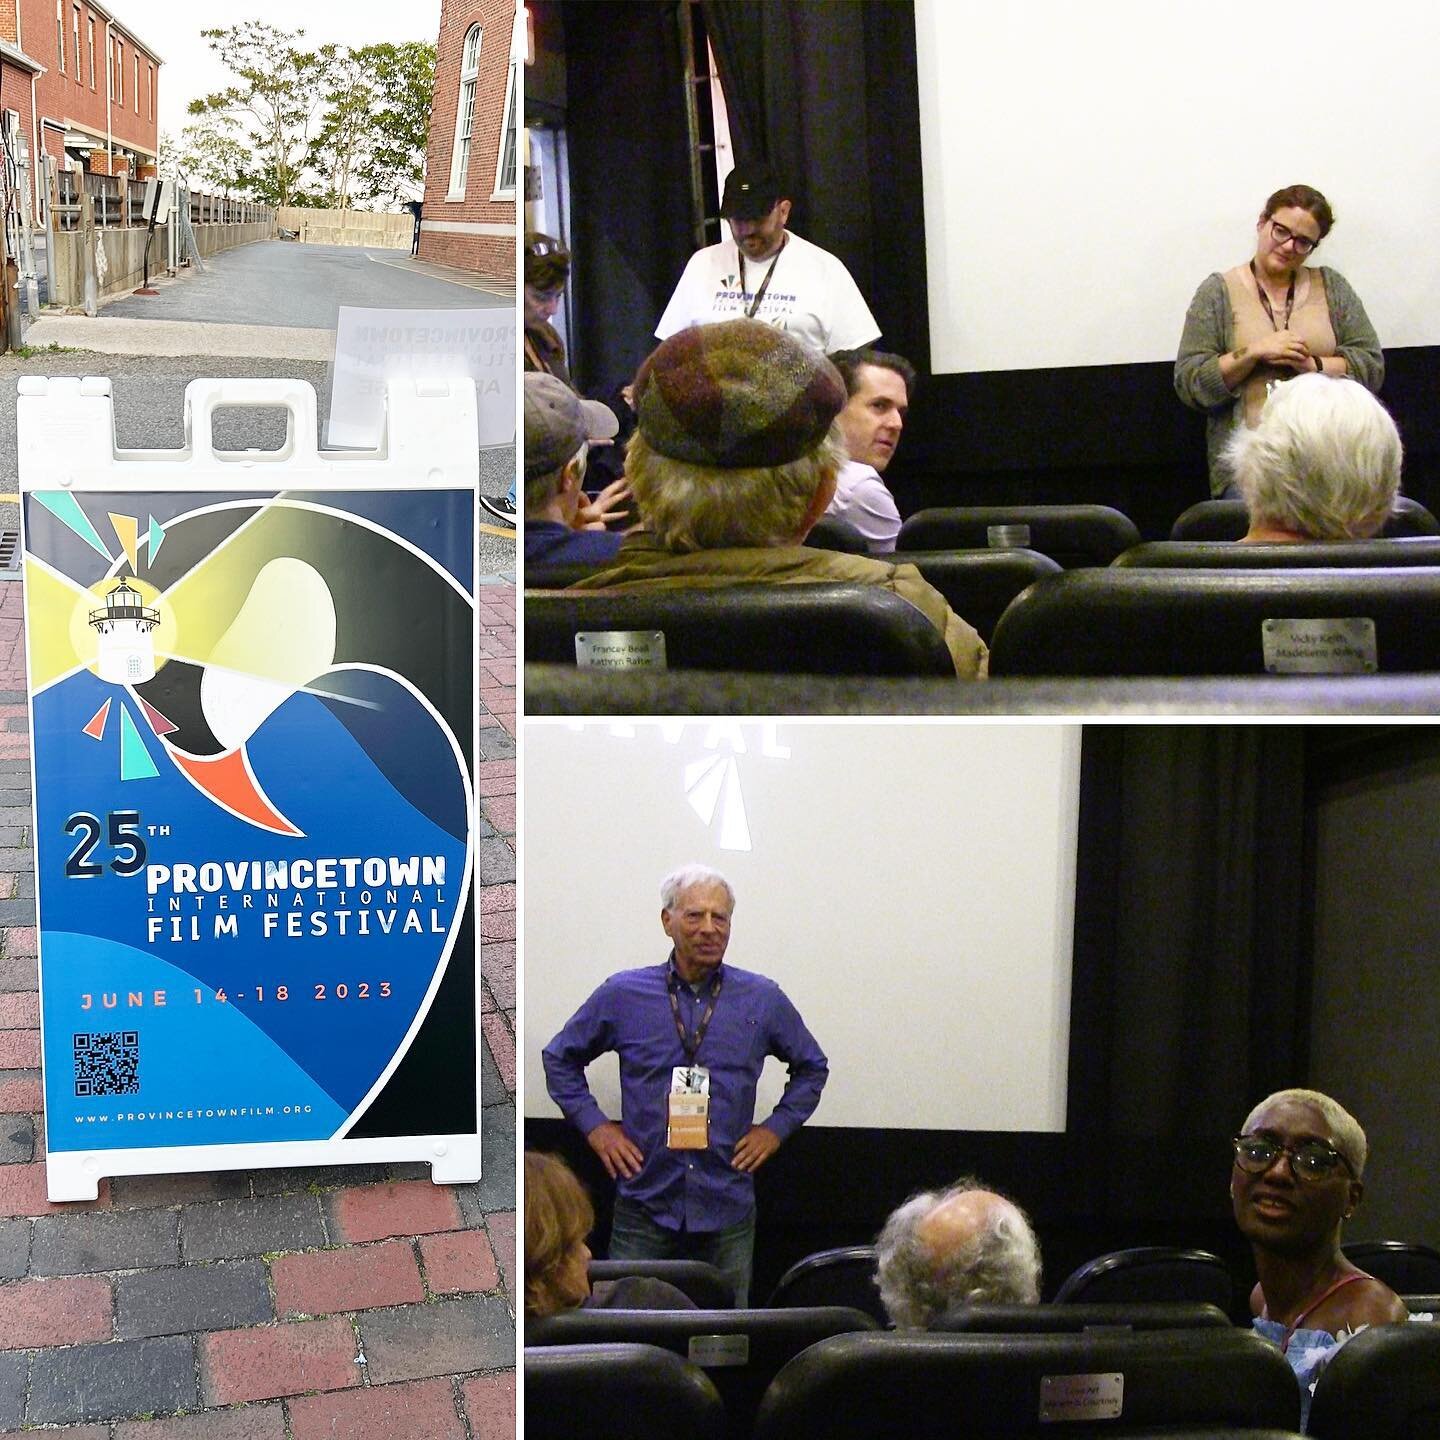 Director of the film It's Basic answered questions at the 25th anniversary of Provincetown International Film Festival. This documentary explores possibilities for positive economic changes for families all over the US and beyond!
&bull;
Check out ou